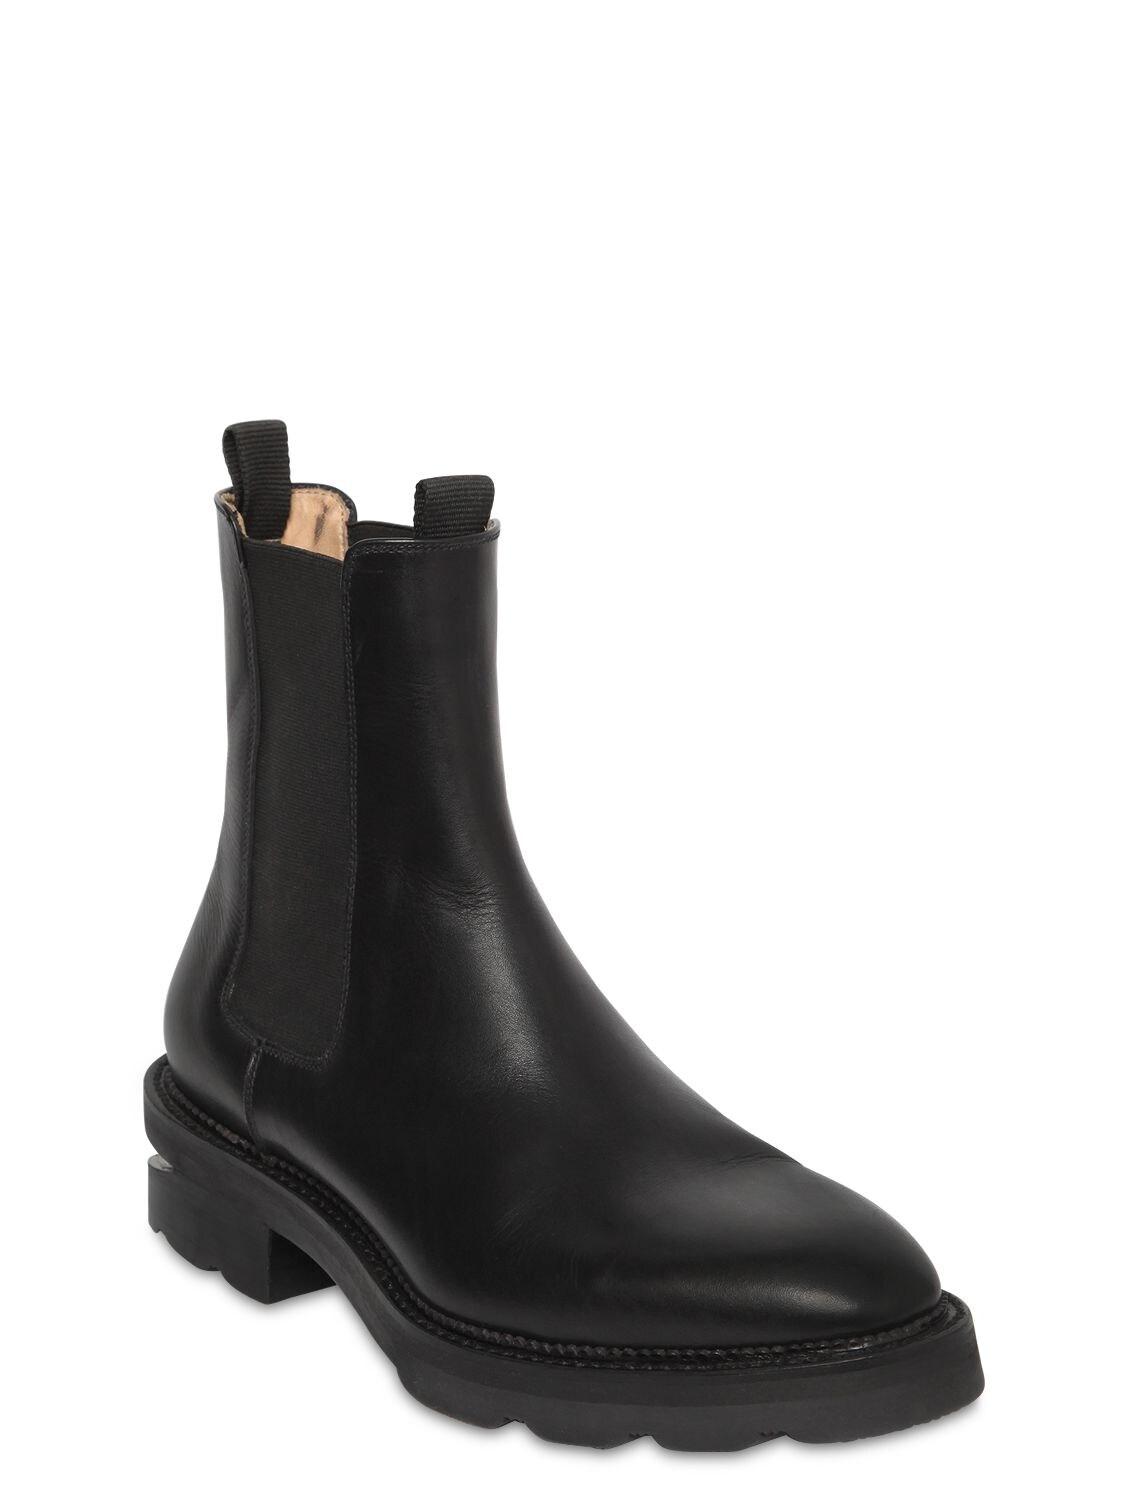 Alexander Wang 40mm Andy Leather Ankle Boots in Black - Lyst